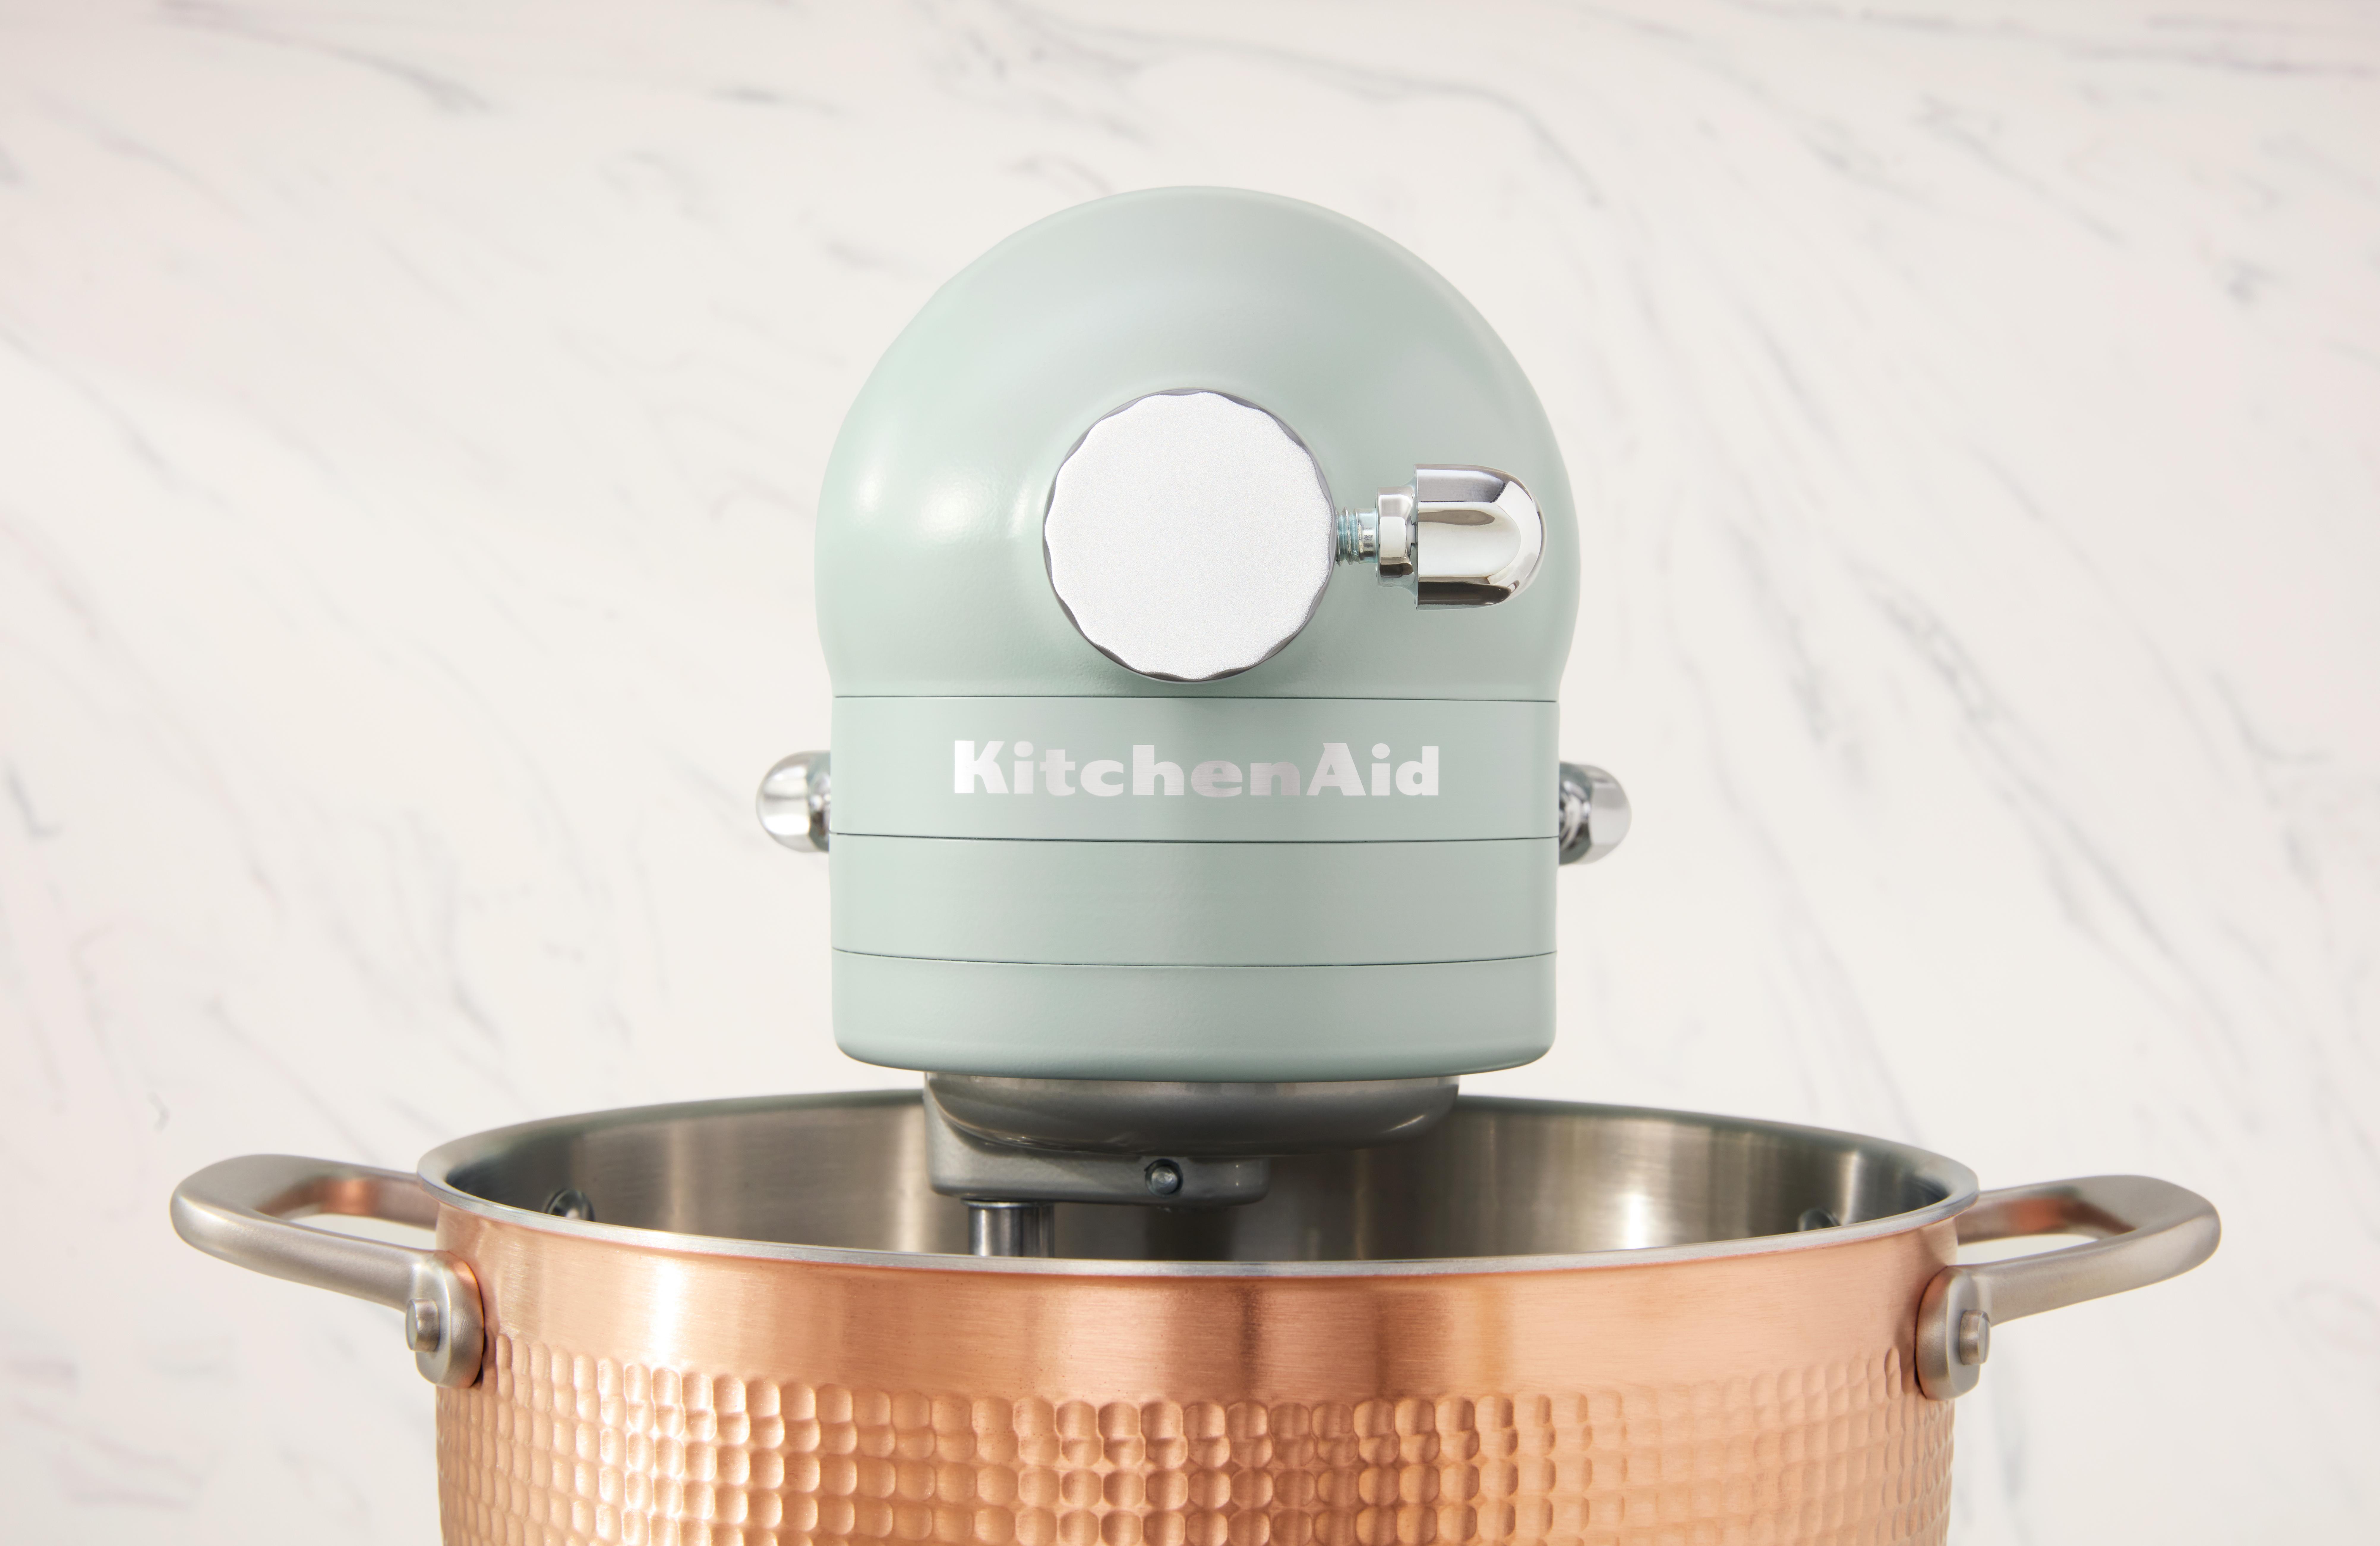 My Favorite Things Holiday Giveaway: Win a Copper KitchenAid Stand